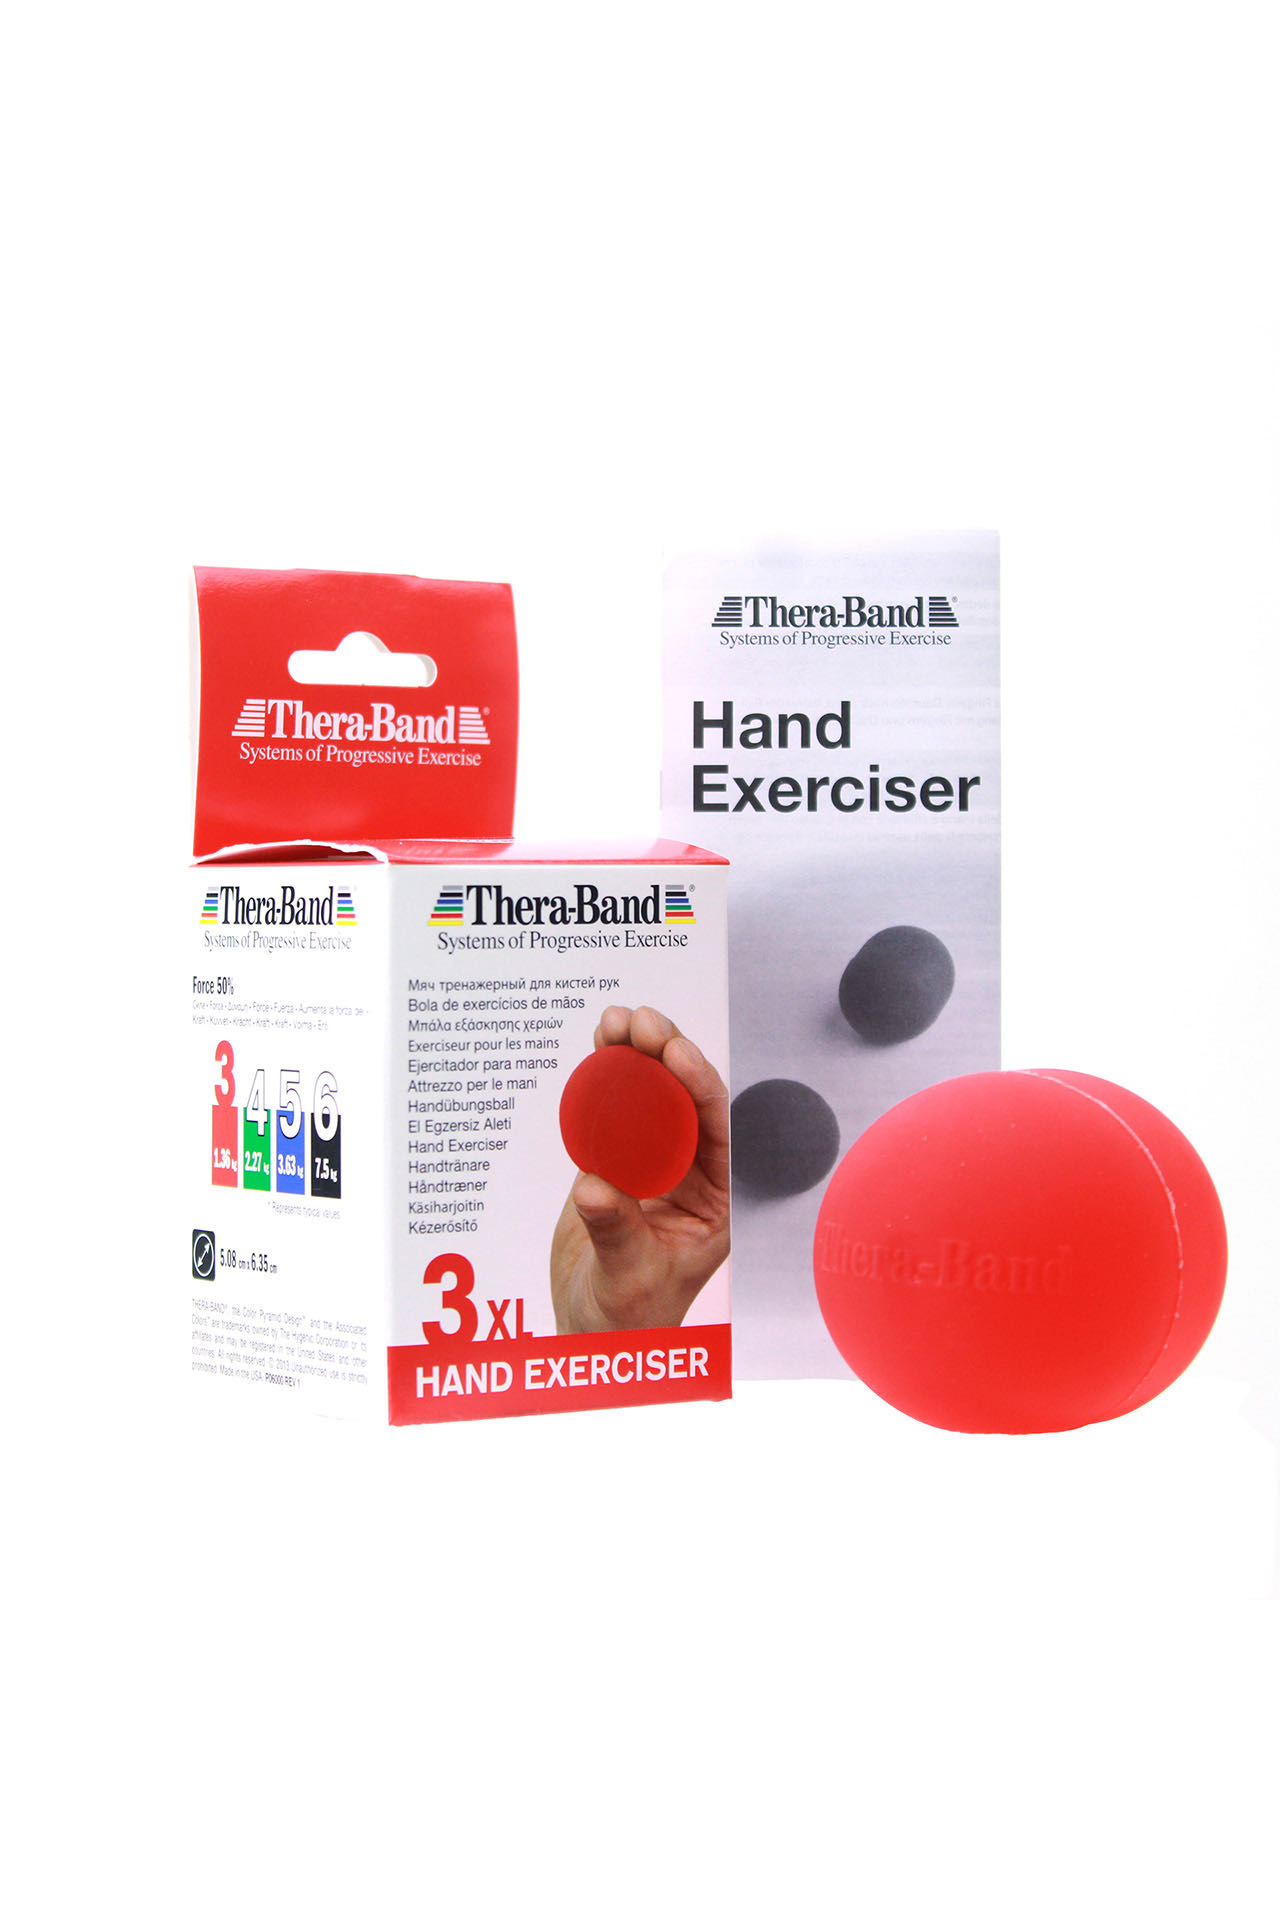 hand excersiser thera band red xl fengbao kung fu finger trainer shop wien 1080